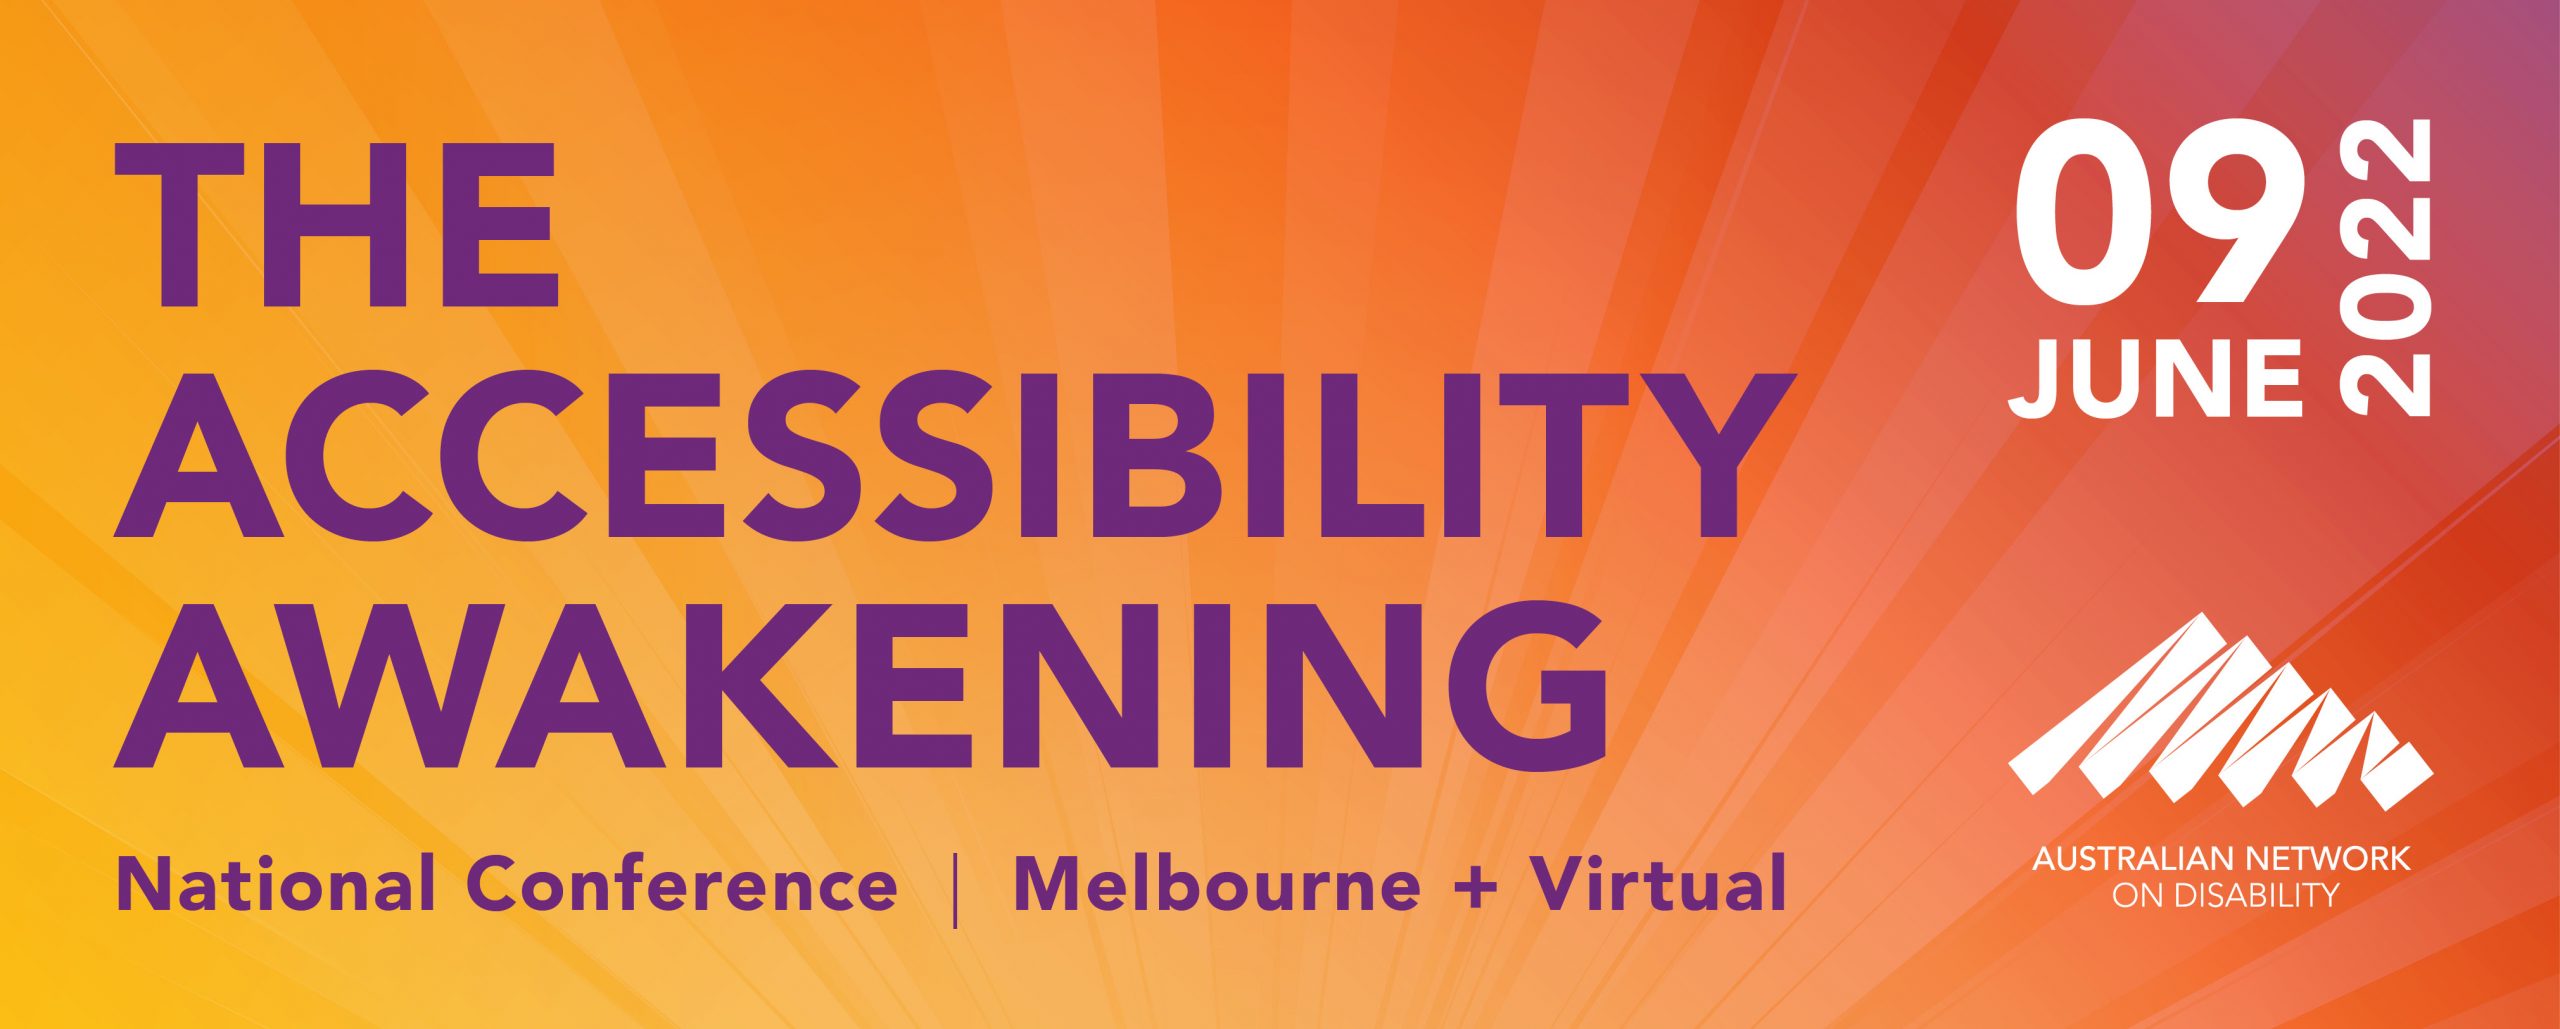 The Accessibility Awakening, Australian Network on Disability National Conference. Melbourne + Virtual. 9 June 2022.